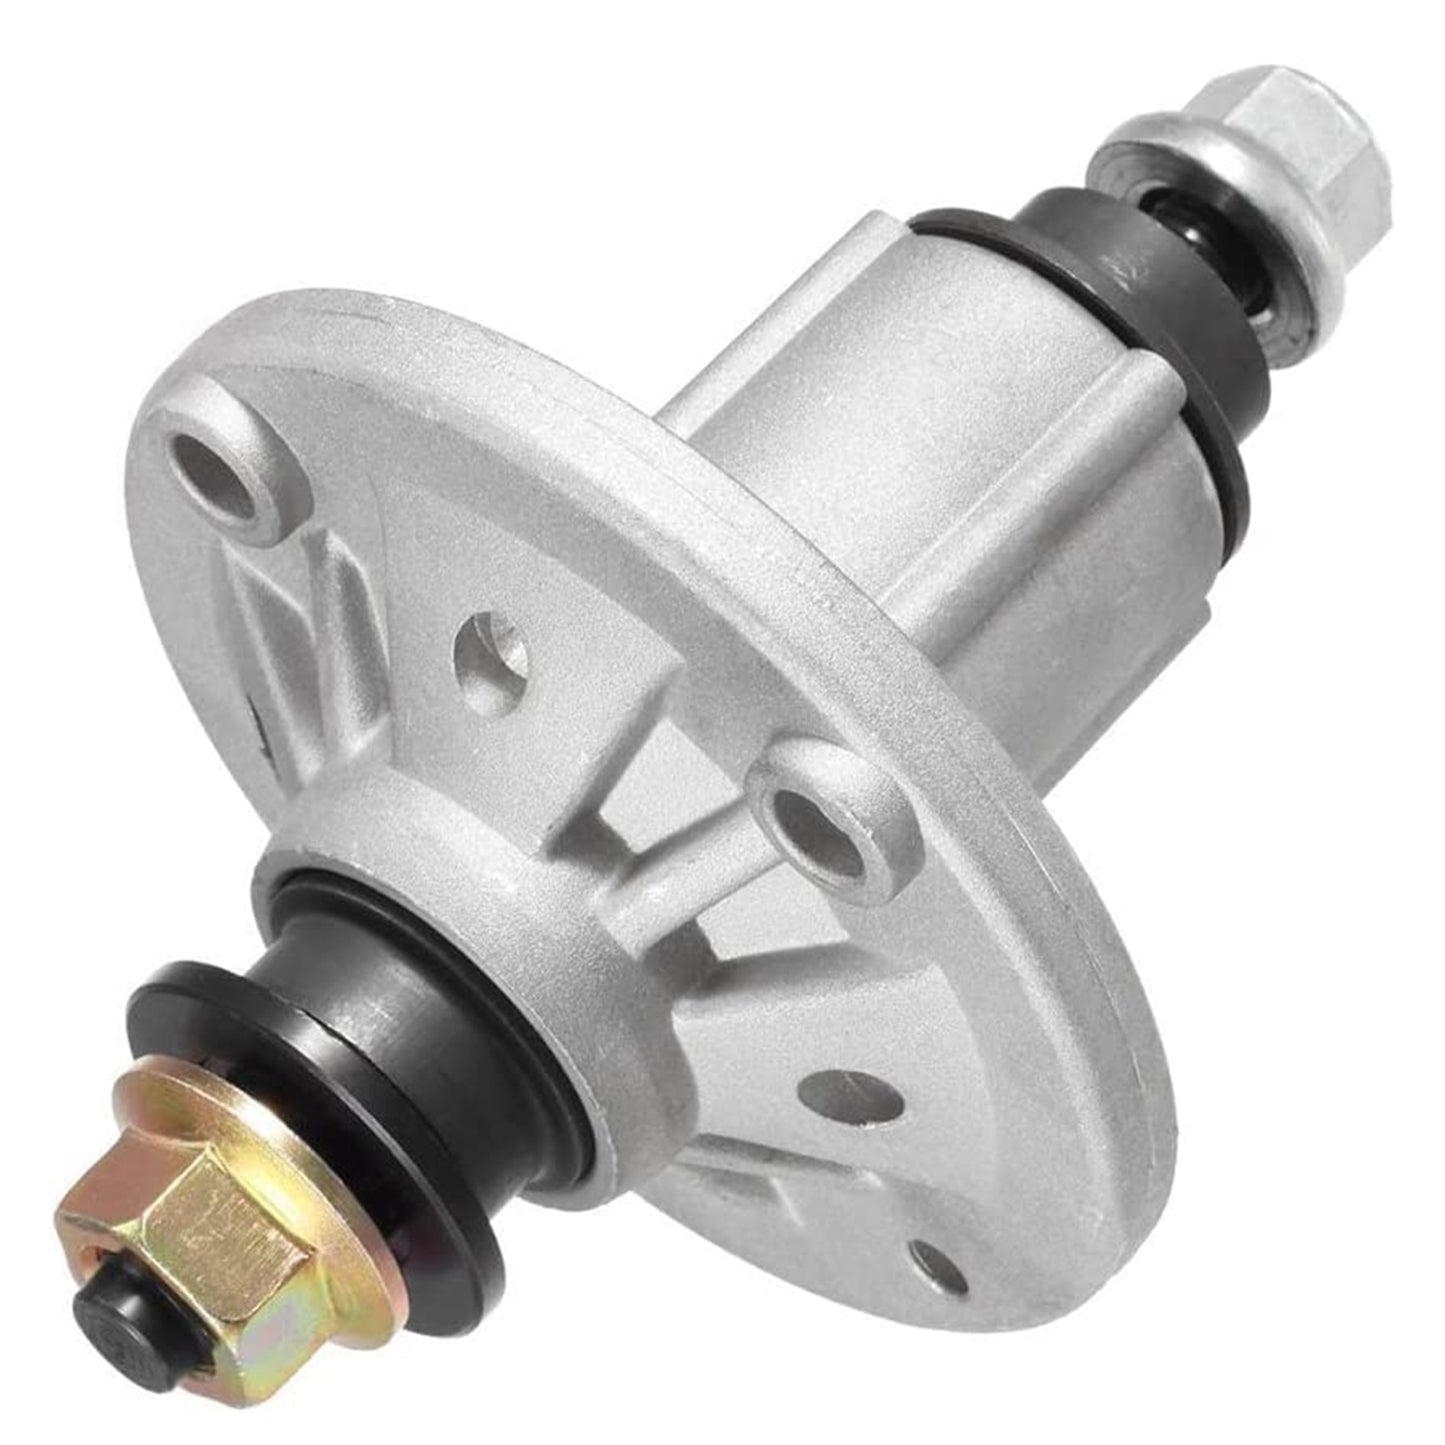 GY21098 Spindle Compatible with John Deere 102 105 107H 107S 115 125 135 145 155C 92H